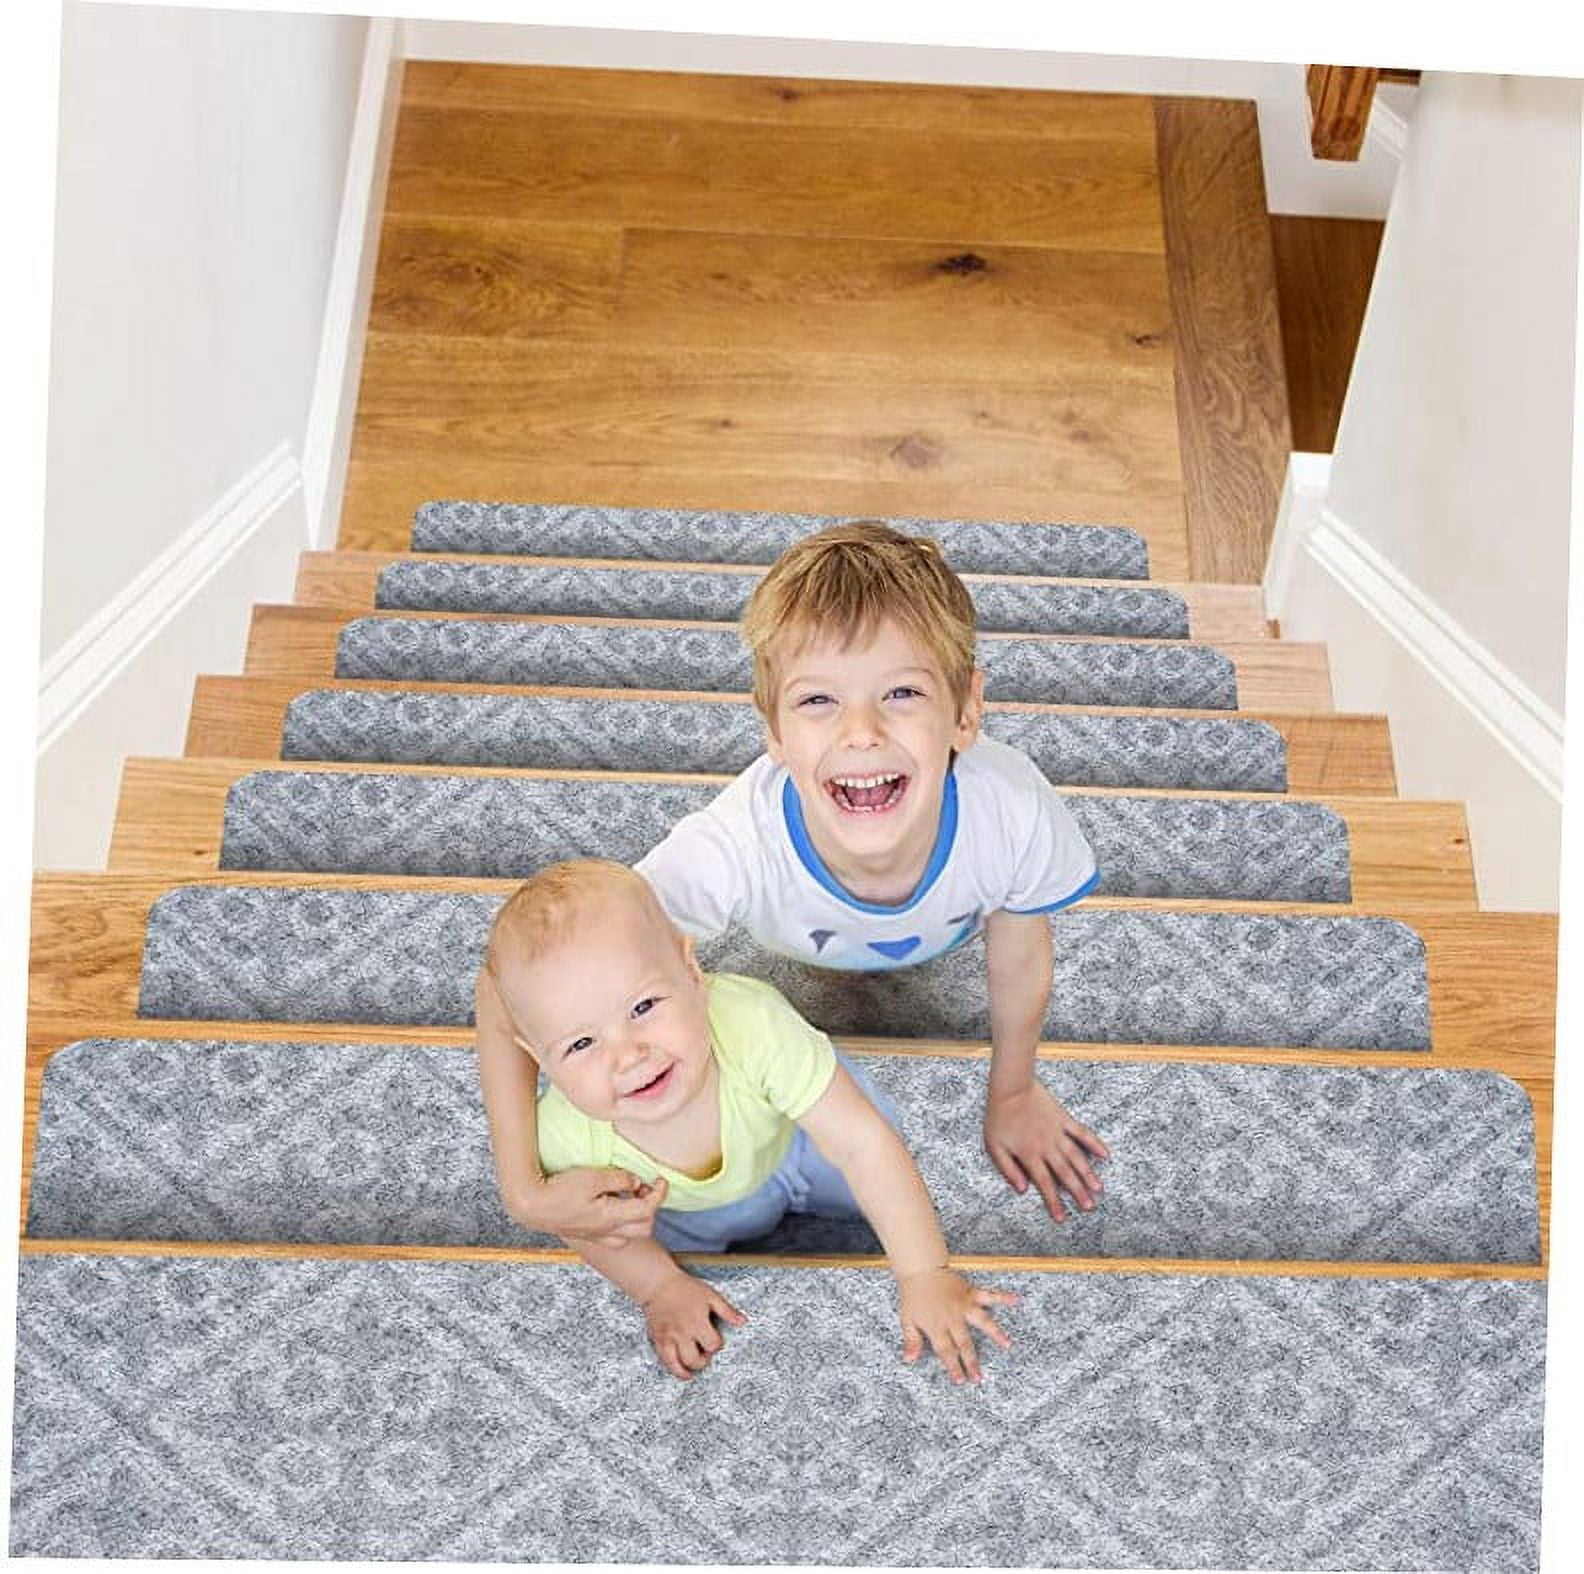  YSDQ Stair Treads Carpet, Self-Adhesive Step Non-Slip Resistant  Indoor Stair Mats, Washable Safety Stair Tread Carpet, for Kids Elders and  Pets : 家居裝修